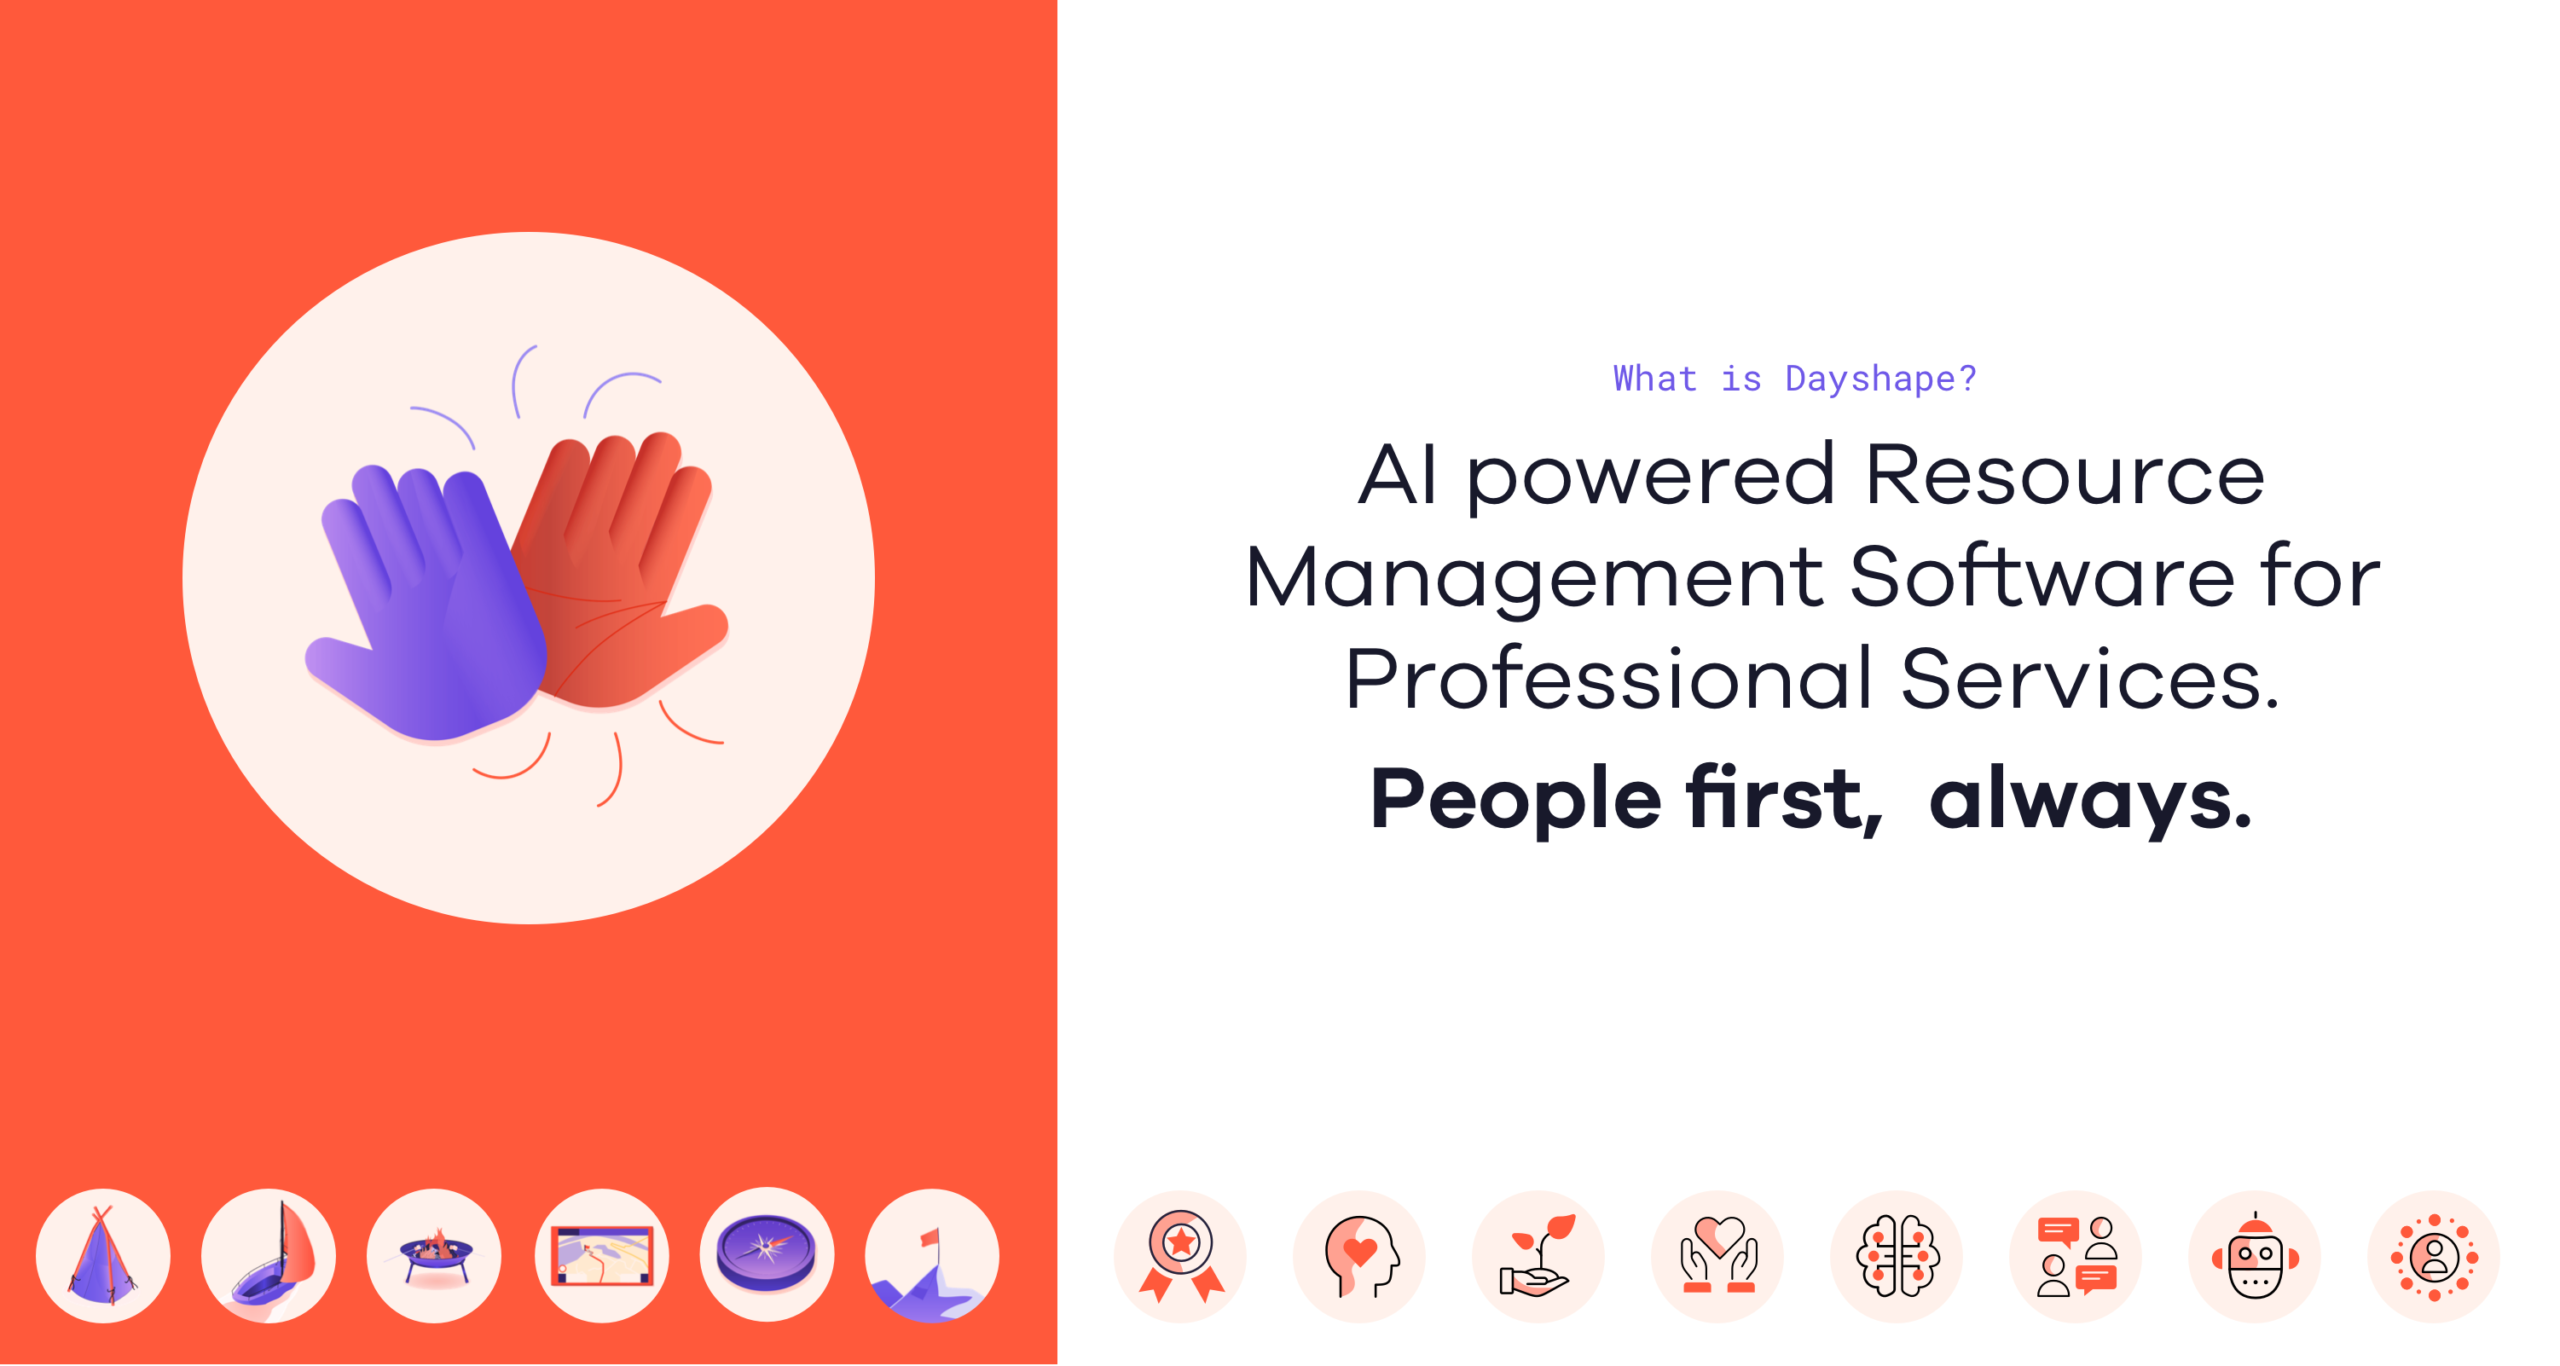 An orange left hand column has a circle with a purple and orange high-fiving: the right two thirds of the screen say ”What is Dayshape? Al powered Resource Management Software for Professional Services. People first, always. 16 circular icons overlay the bottom of the screen.